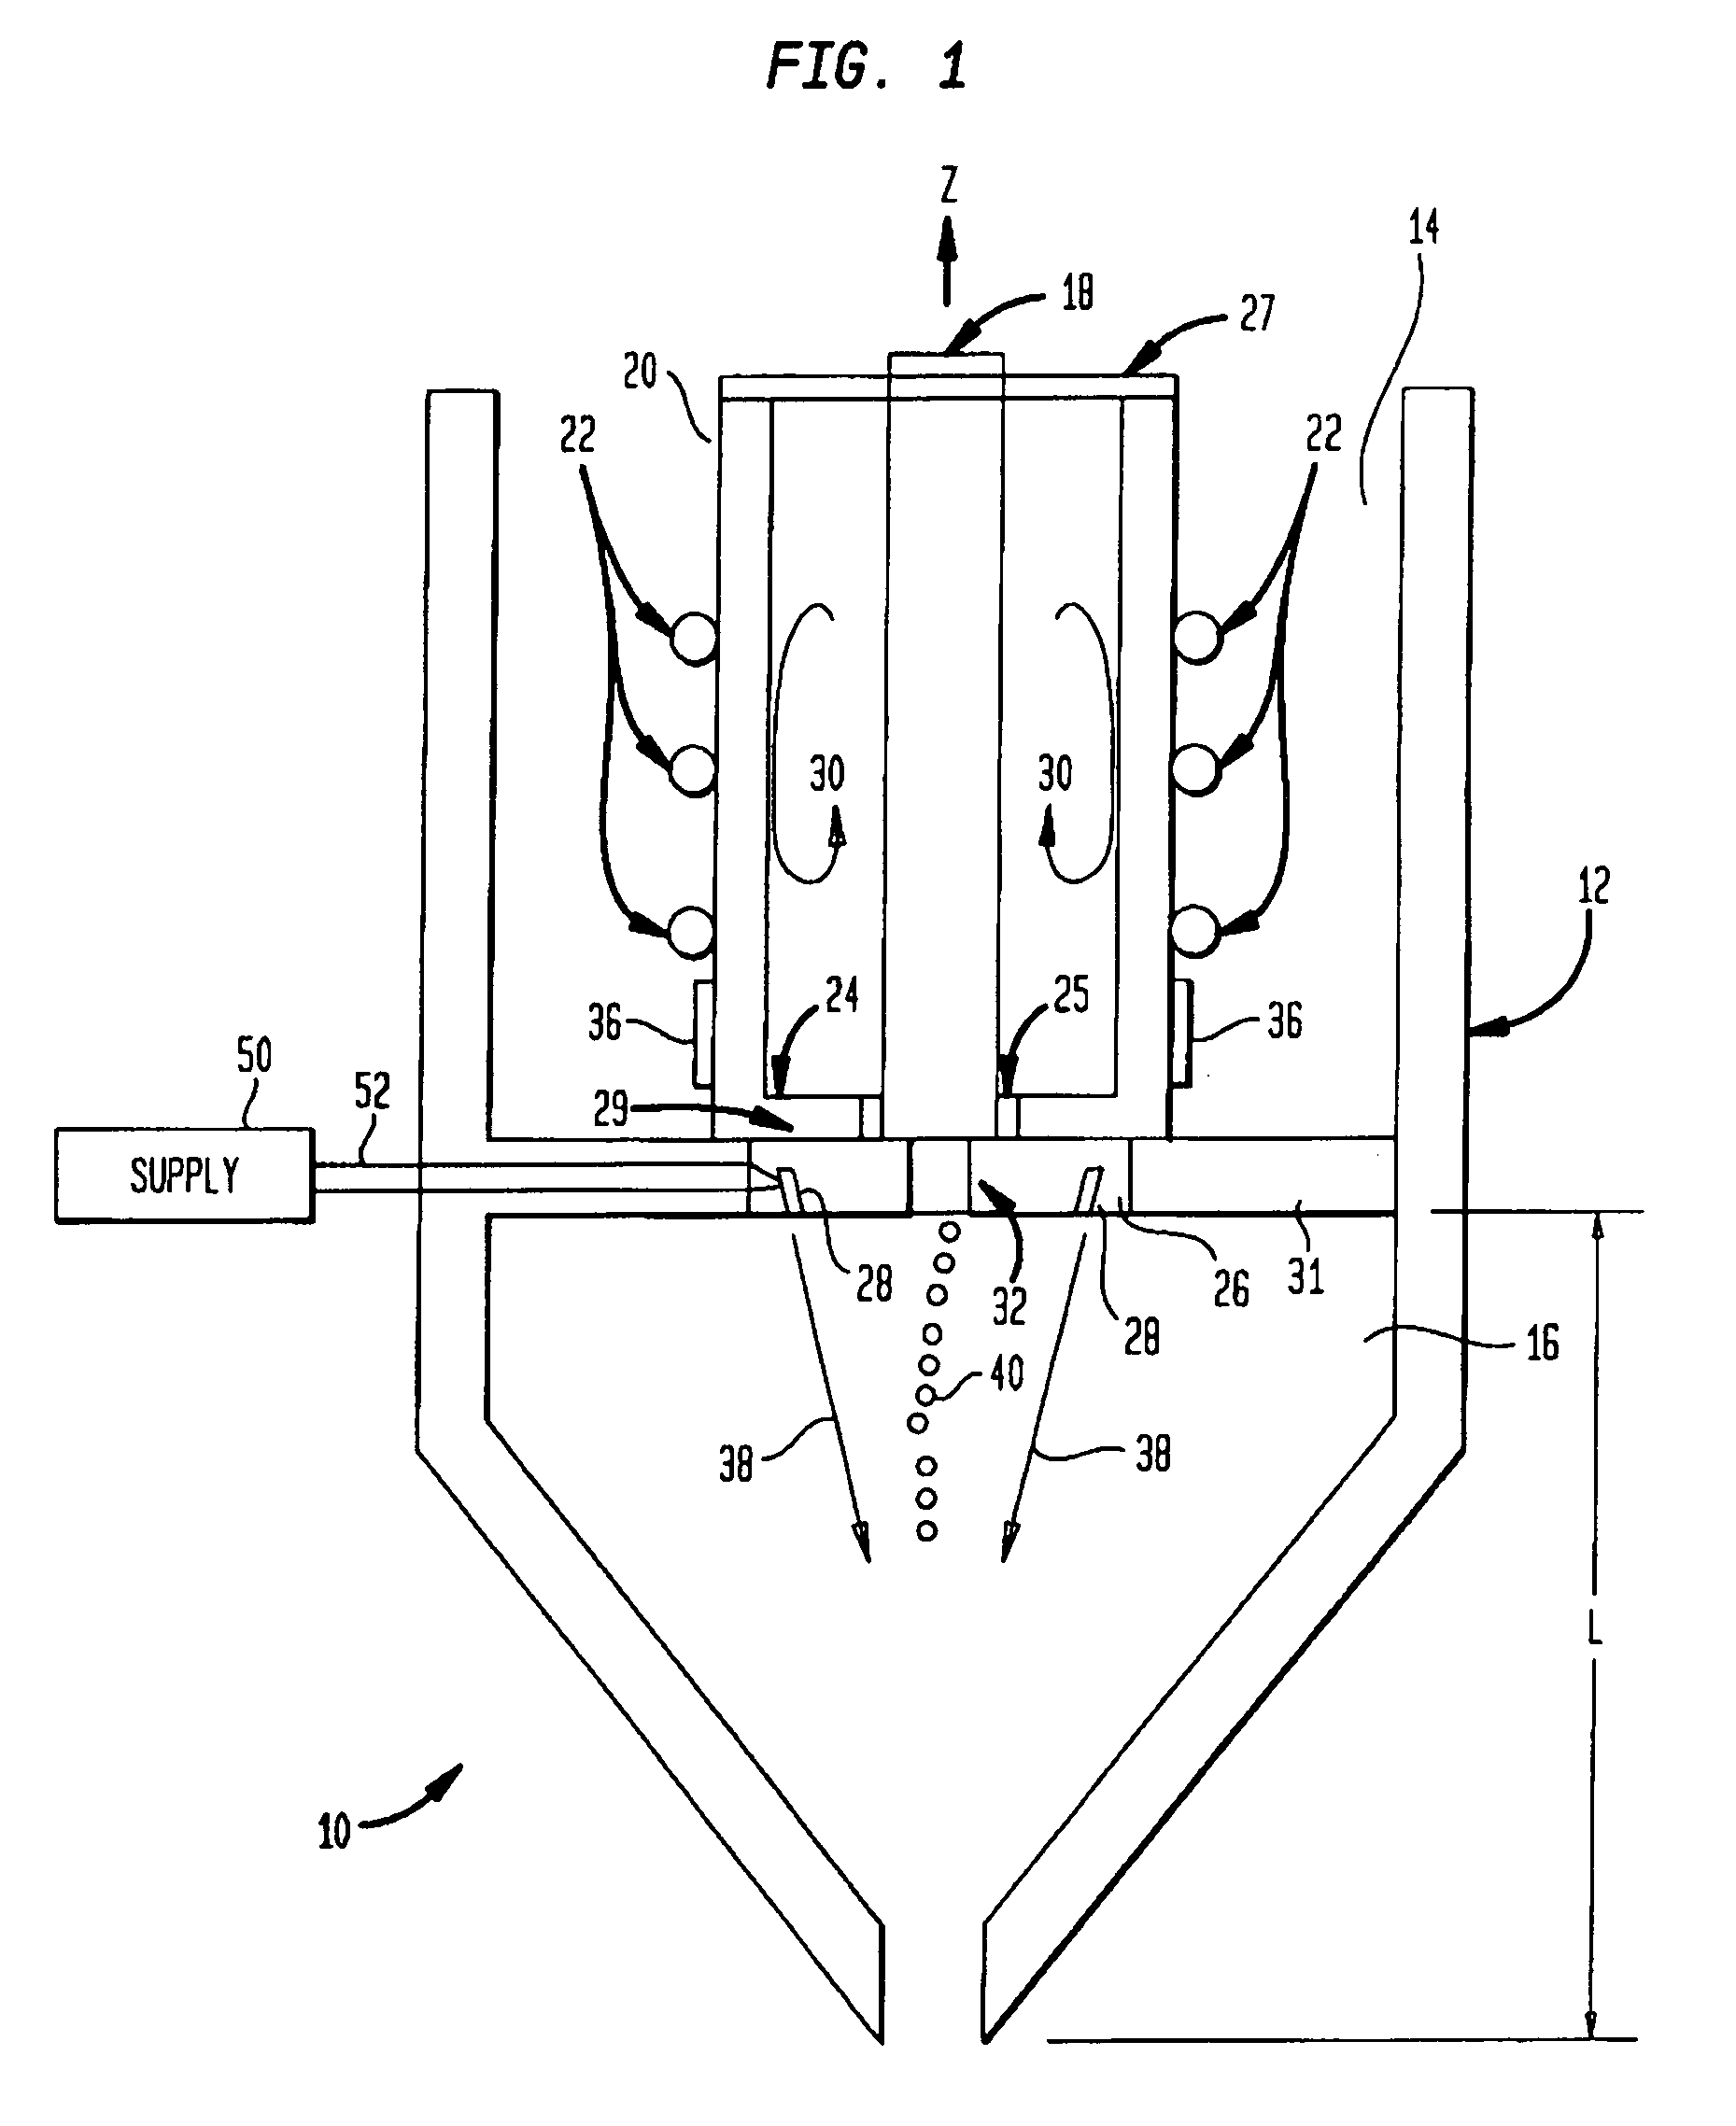 Method for fabricating a medical component from a material having a high carbide phase